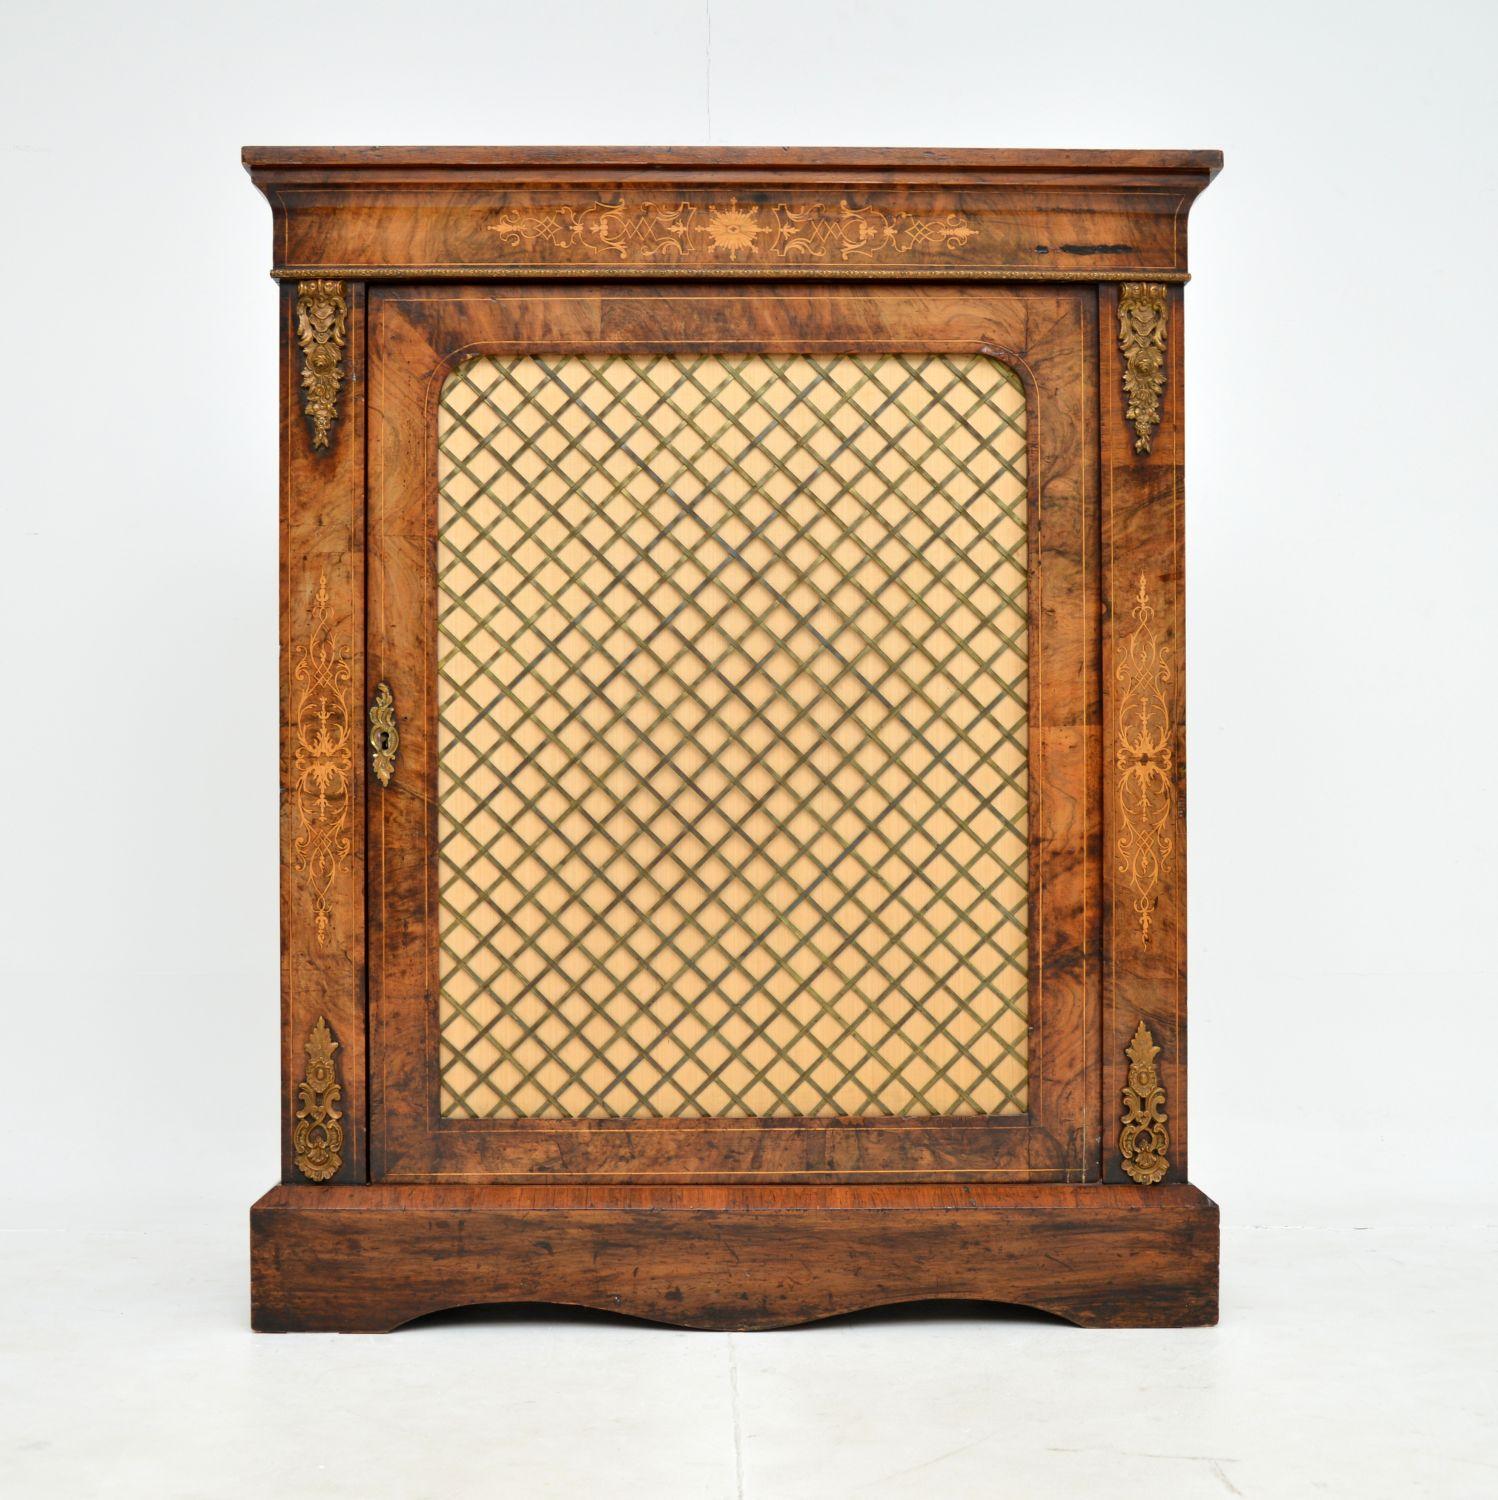 A stunning antique Victorian burr walnut pier cabinet, with a wonderful original colour & lots of character. This was made in England, it dates from around the 1860-1880 period.

The quality is excellent, this has gorgeous burr walnut grain